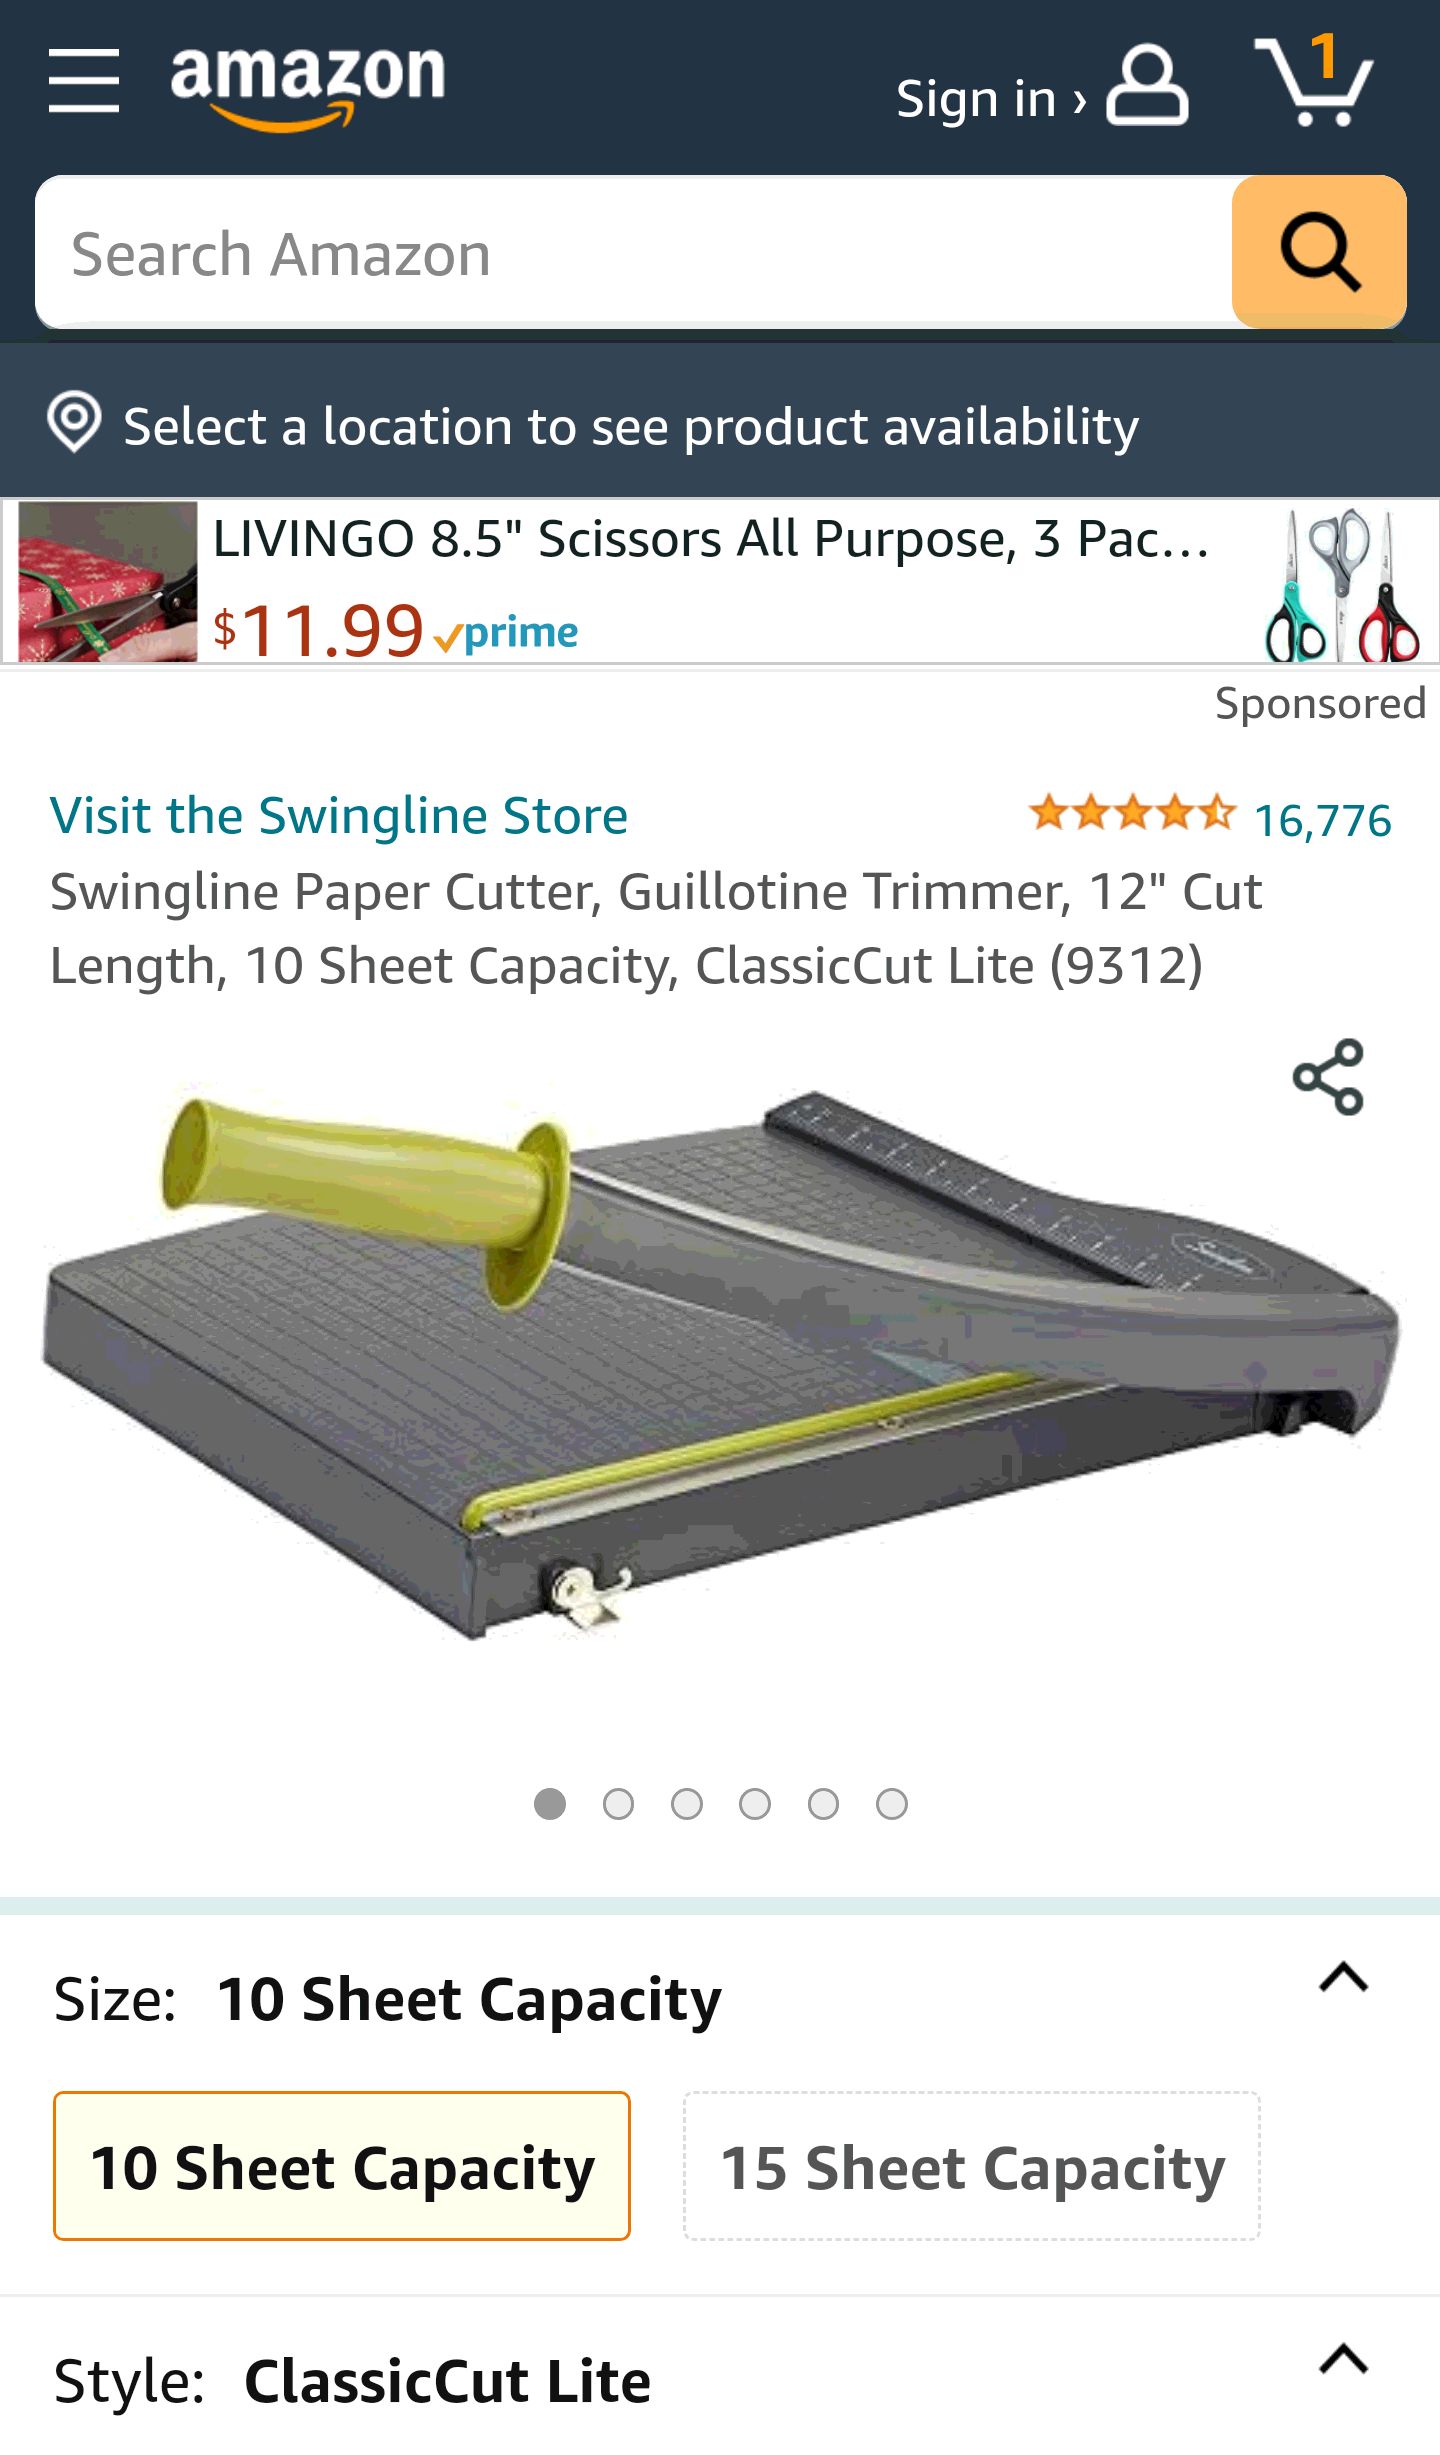 Amazon.com : Swingline Paper Cutter, Guillotine Trimmer, 12" Cut Length, 10 Sheet Capacity, ClassicCut Lite (9312) : Office Products